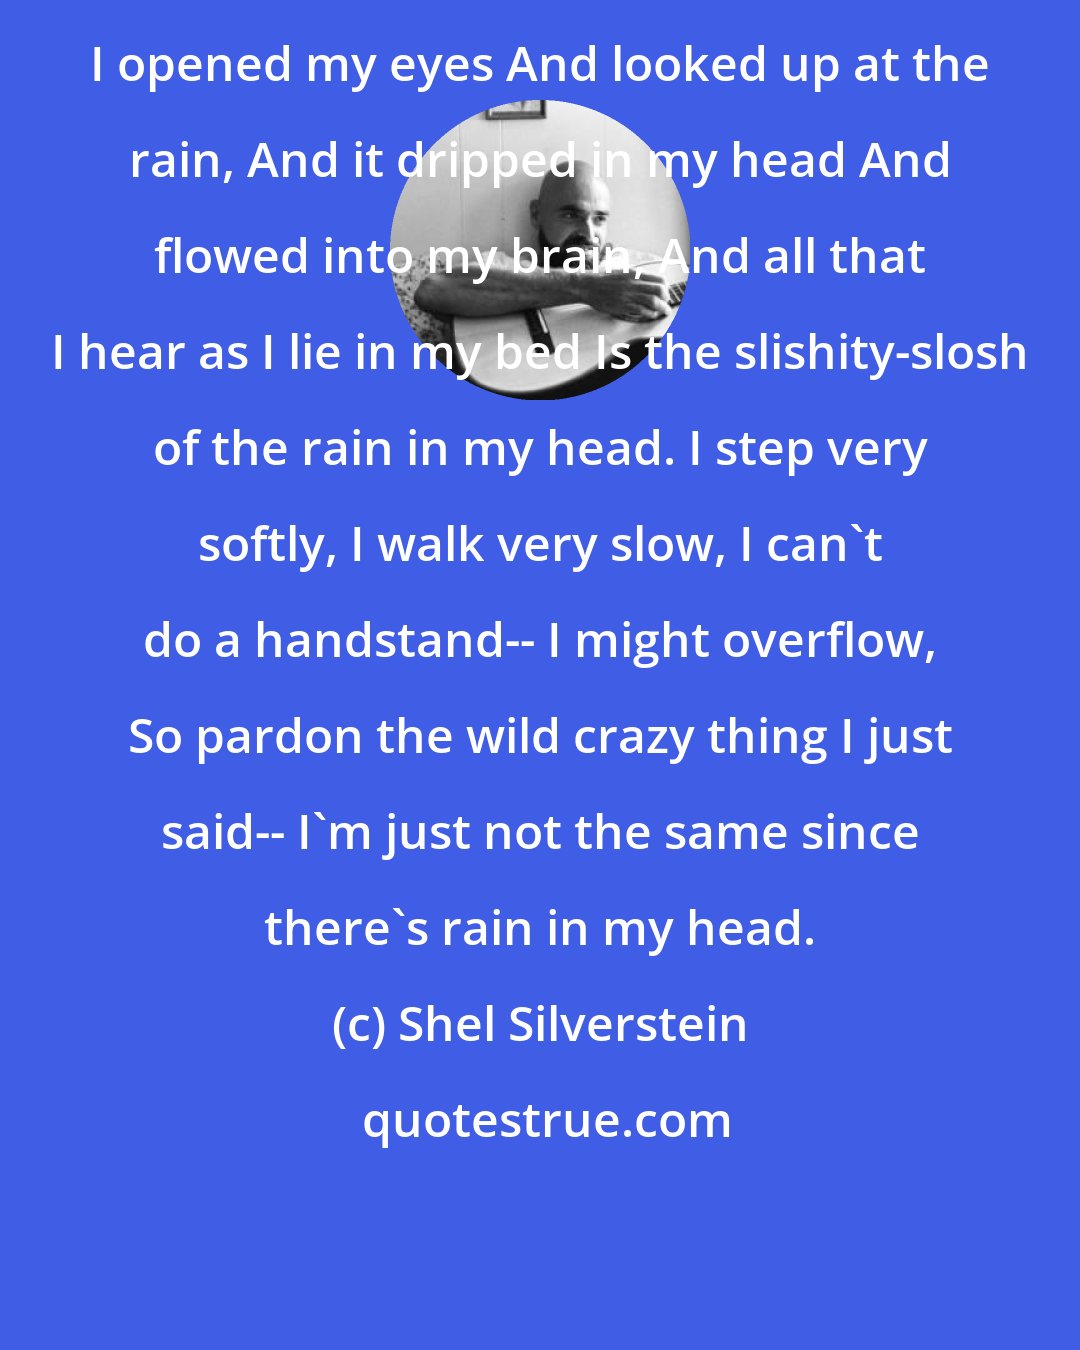 Shel Silverstein: I opened my eyes And looked up at the rain, And it dripped in my head And flowed into my brain, And all that I hear as I lie in my bed Is the slishity-slosh of the rain in my head. I step very softly, I walk very slow, I can't do a handstand-- I might overflow, So pardon the wild crazy thing I just said-- I'm just not the same since there's rain in my head.